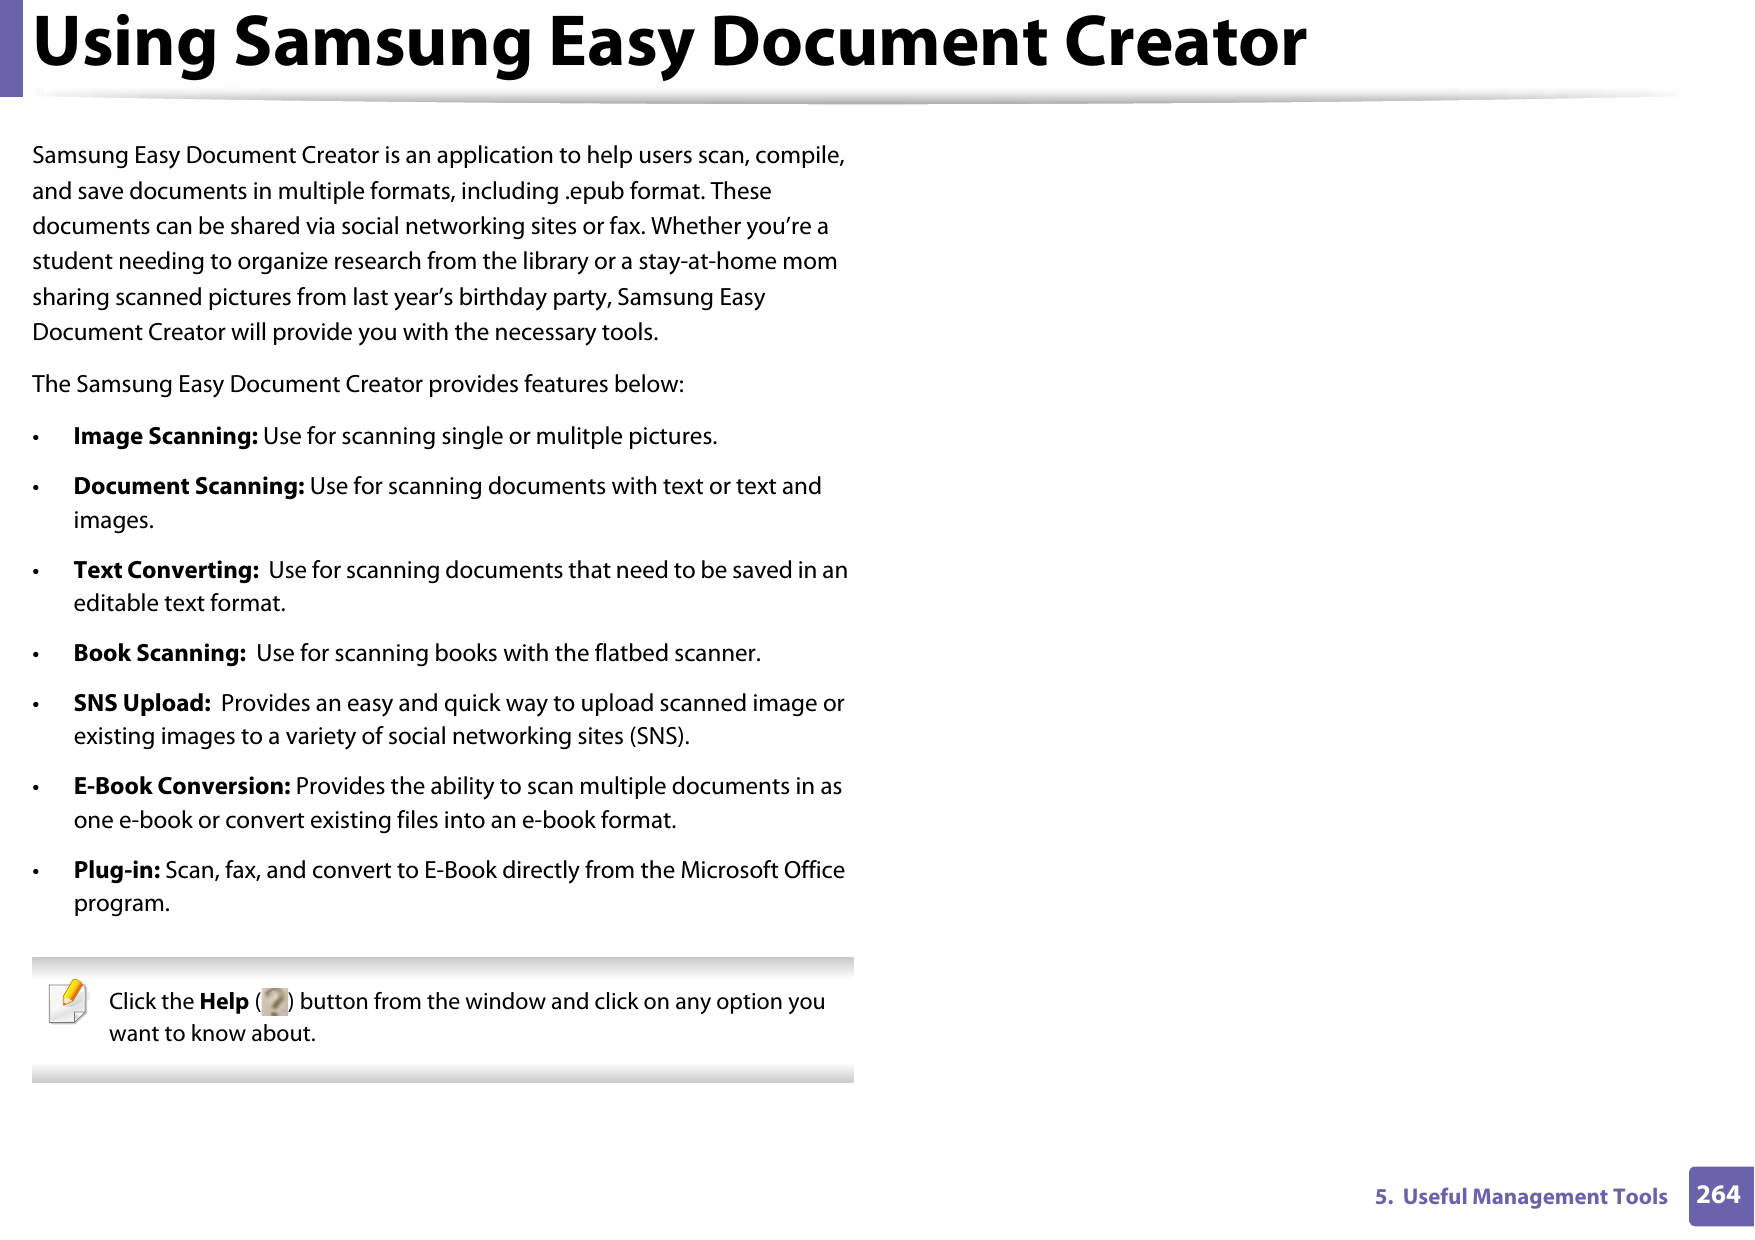 2645.  Useful Management ToolsUsing Samsung Easy Document CreatorSamsung Easy Document Creator is an application to help users scan, compile, and save documents in multiple formats, including .epub format. These documents can be shared via social networking sites or fax. Whether you’re a student needing to organize research from the library or a stay-at-home mom sharing scanned pictures from last year’s birthday party, Samsung Easy Document Creator will provide you with the necessary tools.The Samsung Easy Document Creator provides features below:•Image Scanning: Use for scanning single or mulitple pictures.•Document Scanning: Use for scanning documents with text or text and images.•Text Converting:  Use for scanning documents that need to be saved in an editable text format.•Book Scanning:  Use for scanning books with the flatbed scanner.•SNS Upload:  Provides an easy and quick way to upload scanned image or existing images to a variety of social networking sites (SNS).•E-Book Conversion: Provides the ability to scan multiple documents in as one e-book or convert existing files into an e-book format.•Plug-in: Scan, fax, and convert to E-Book directly from the Microsoft Office program. Click the Help ( ) button from the window and click on any option you want to know about.  